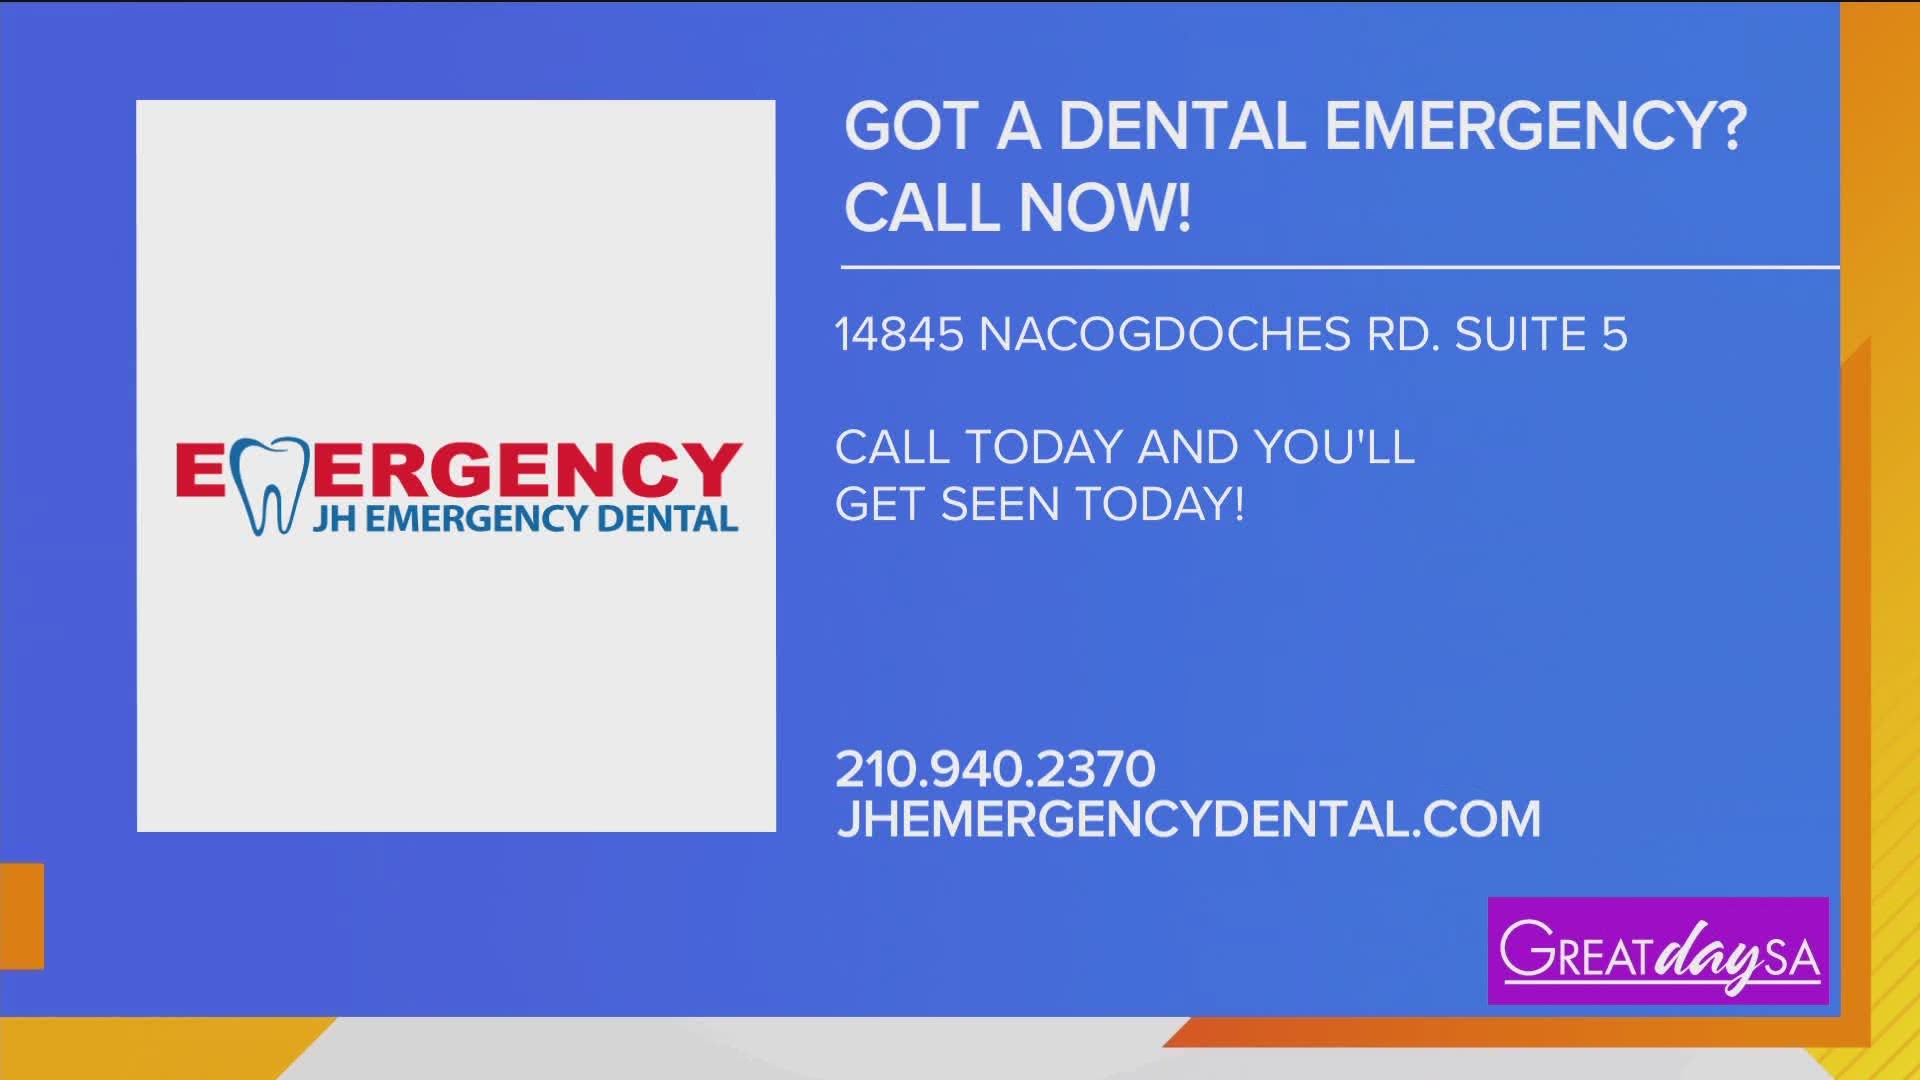 JH Emergency Dental shares more about procedures that can wait versus work you need right now.